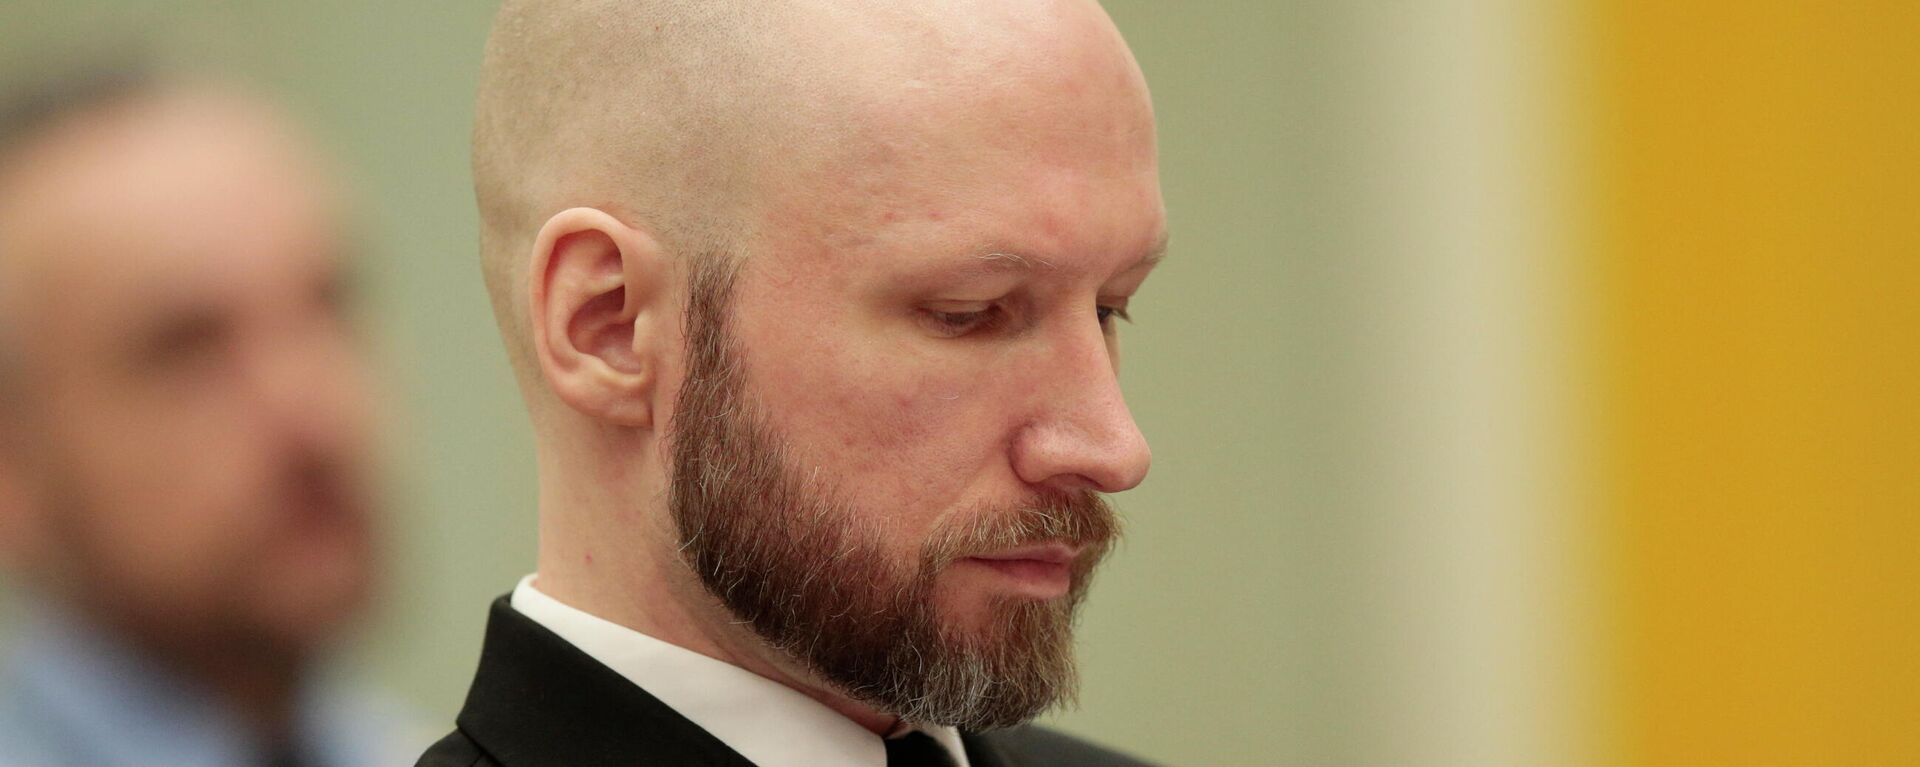 Mass murderer Anders Behring Breivik is pictured on the third day of the appeal case in Borgarting Court of Appeal at Telemark prison in Skien, on January 12, 2017.  - Sputnik International, 1920, 18.01.2022